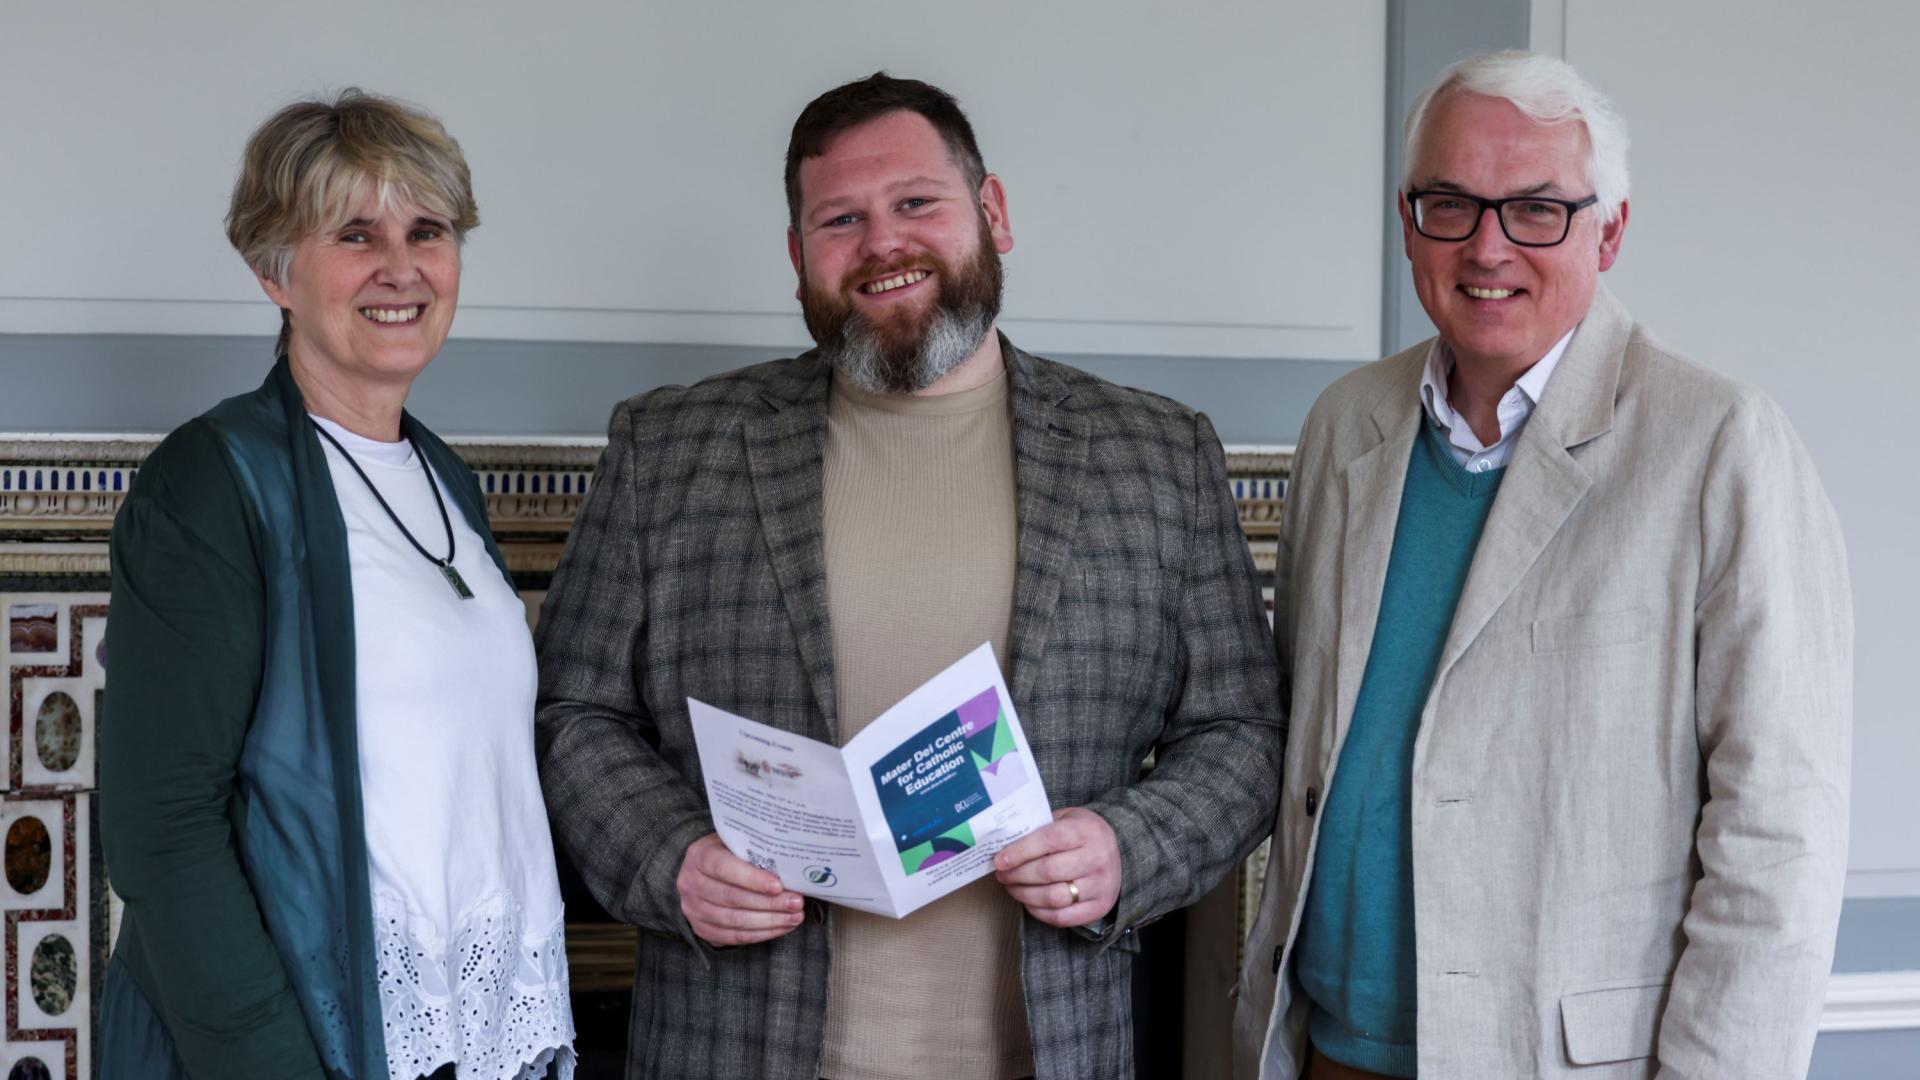  Prof Cora O'Farrell, Director of Mater Dei Centre for Catholic Education, DCU Institute of Education, Dr David Kennedy, Assistant Professor of Theology and Religious Education, DCU Institute of Education, Raymond Friel OBE,  Former CEO of Plymouth CAST a